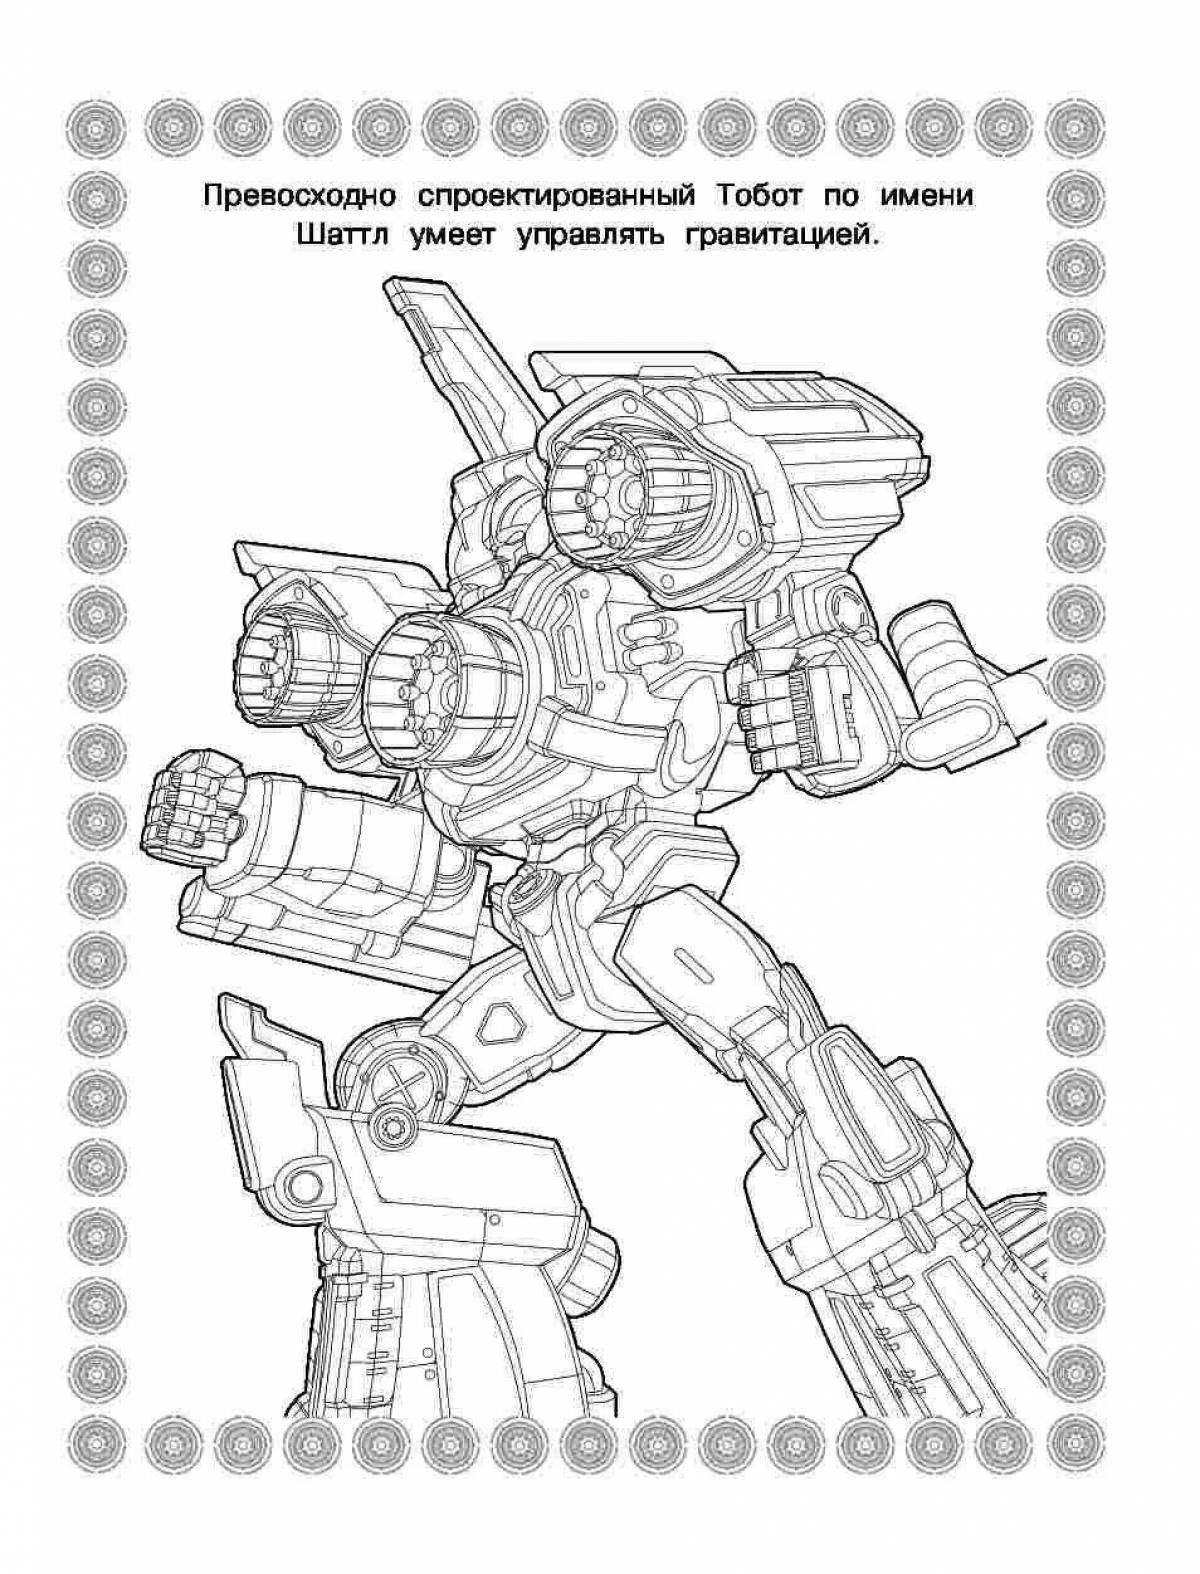 Coloring page charming master w tobot